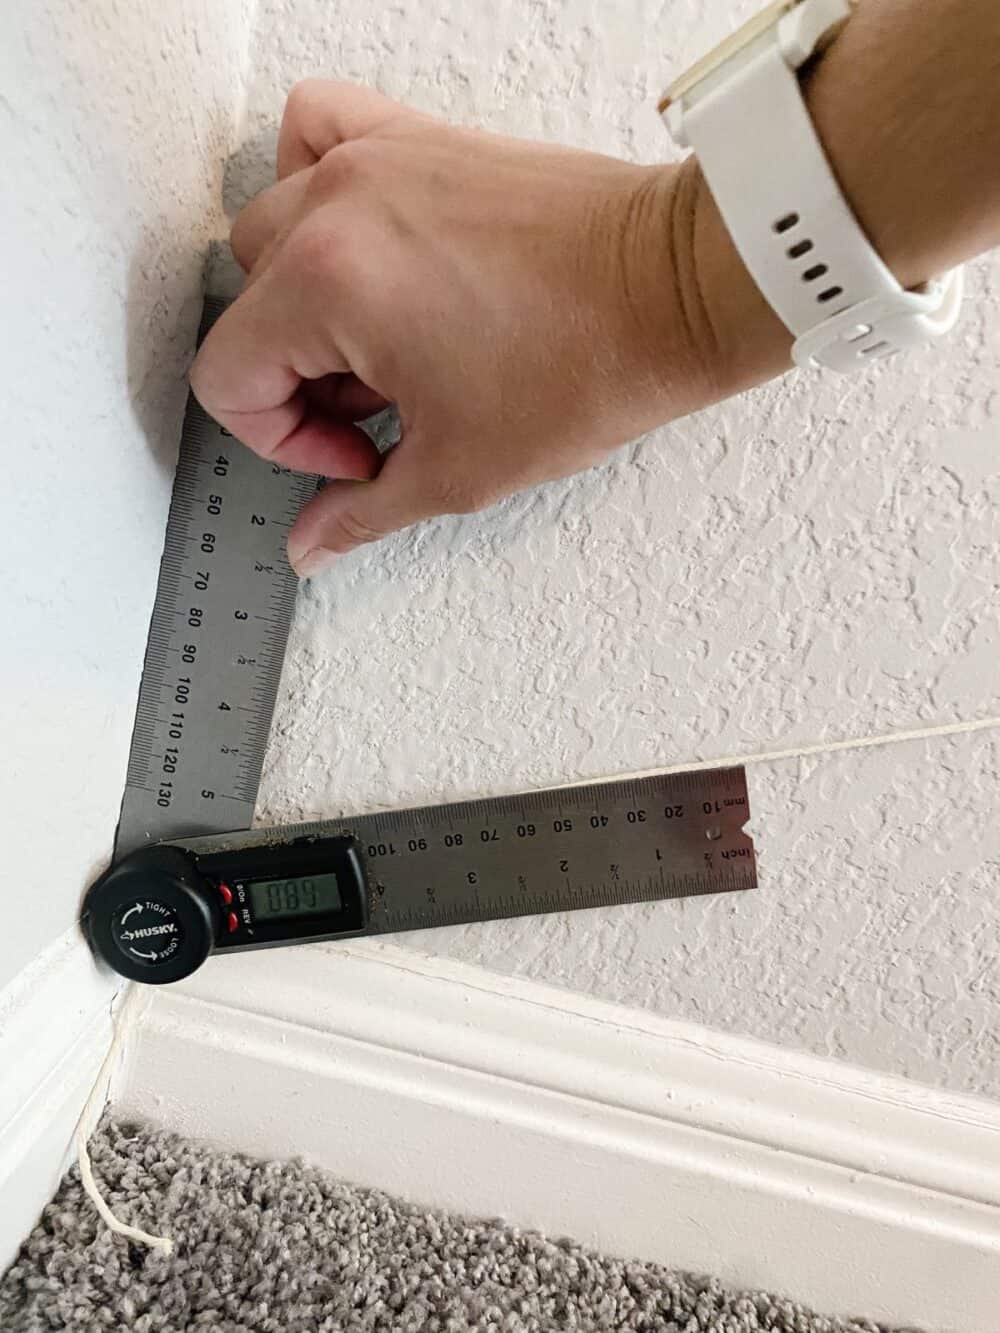 Hang using angle finder to find the angle to place trim